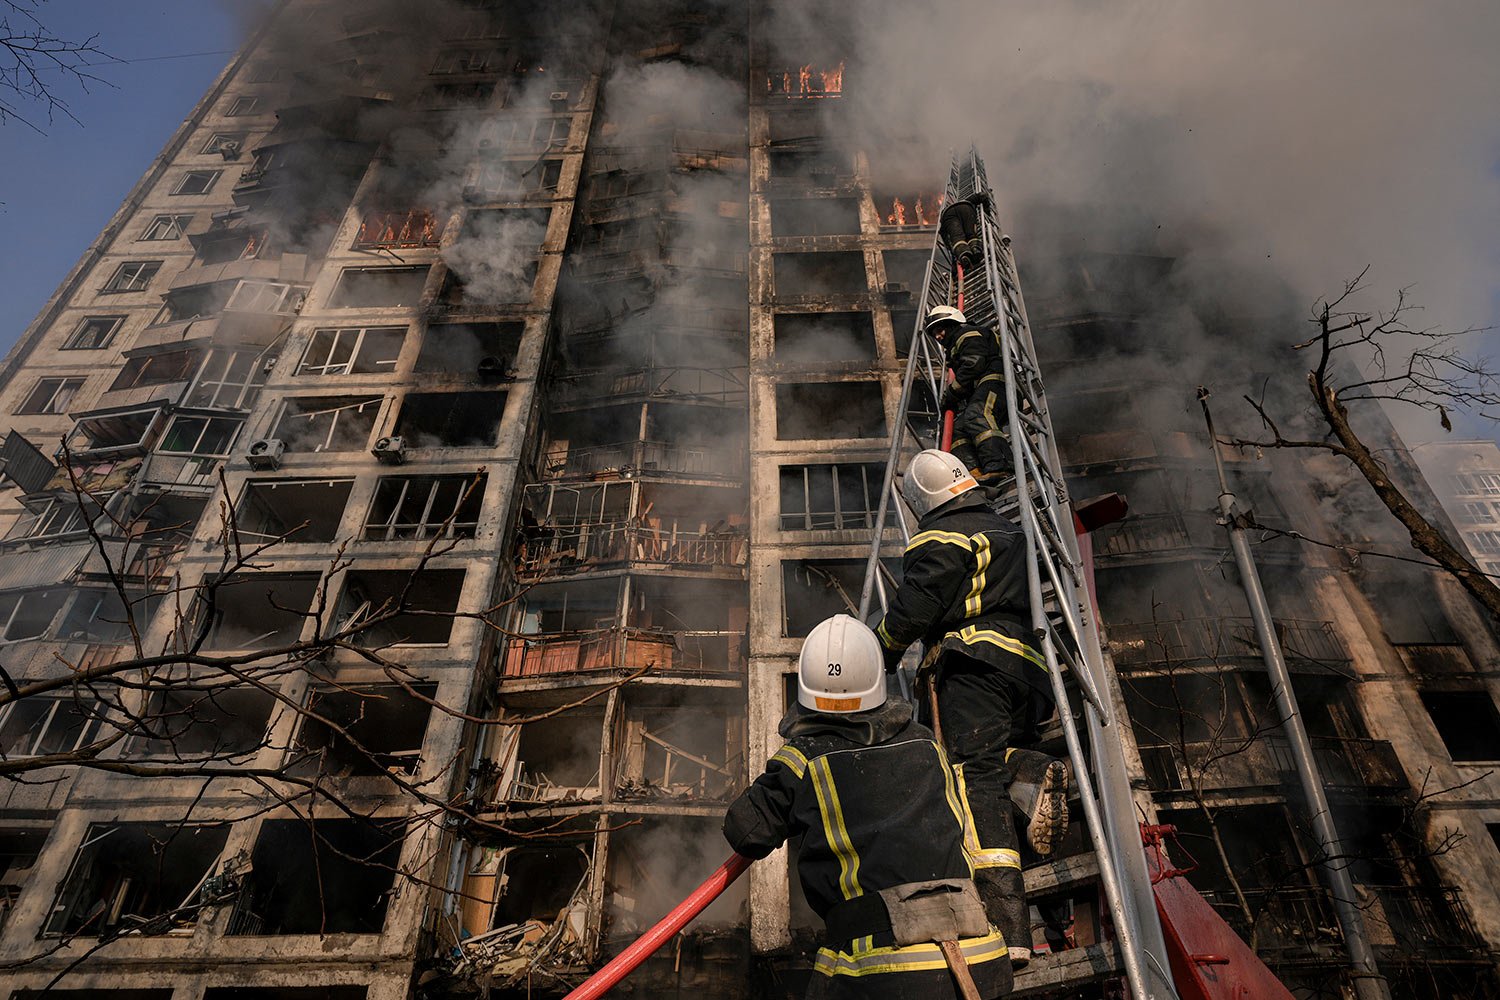  Firefighters climb a ladder while working to extinguish a blaze in a destroyed apartment building after a bombing in a residential area in Kyiv, Ukraine, Tuesday, March 15, 2022. (AP Photo/Vadim Ghirda) 